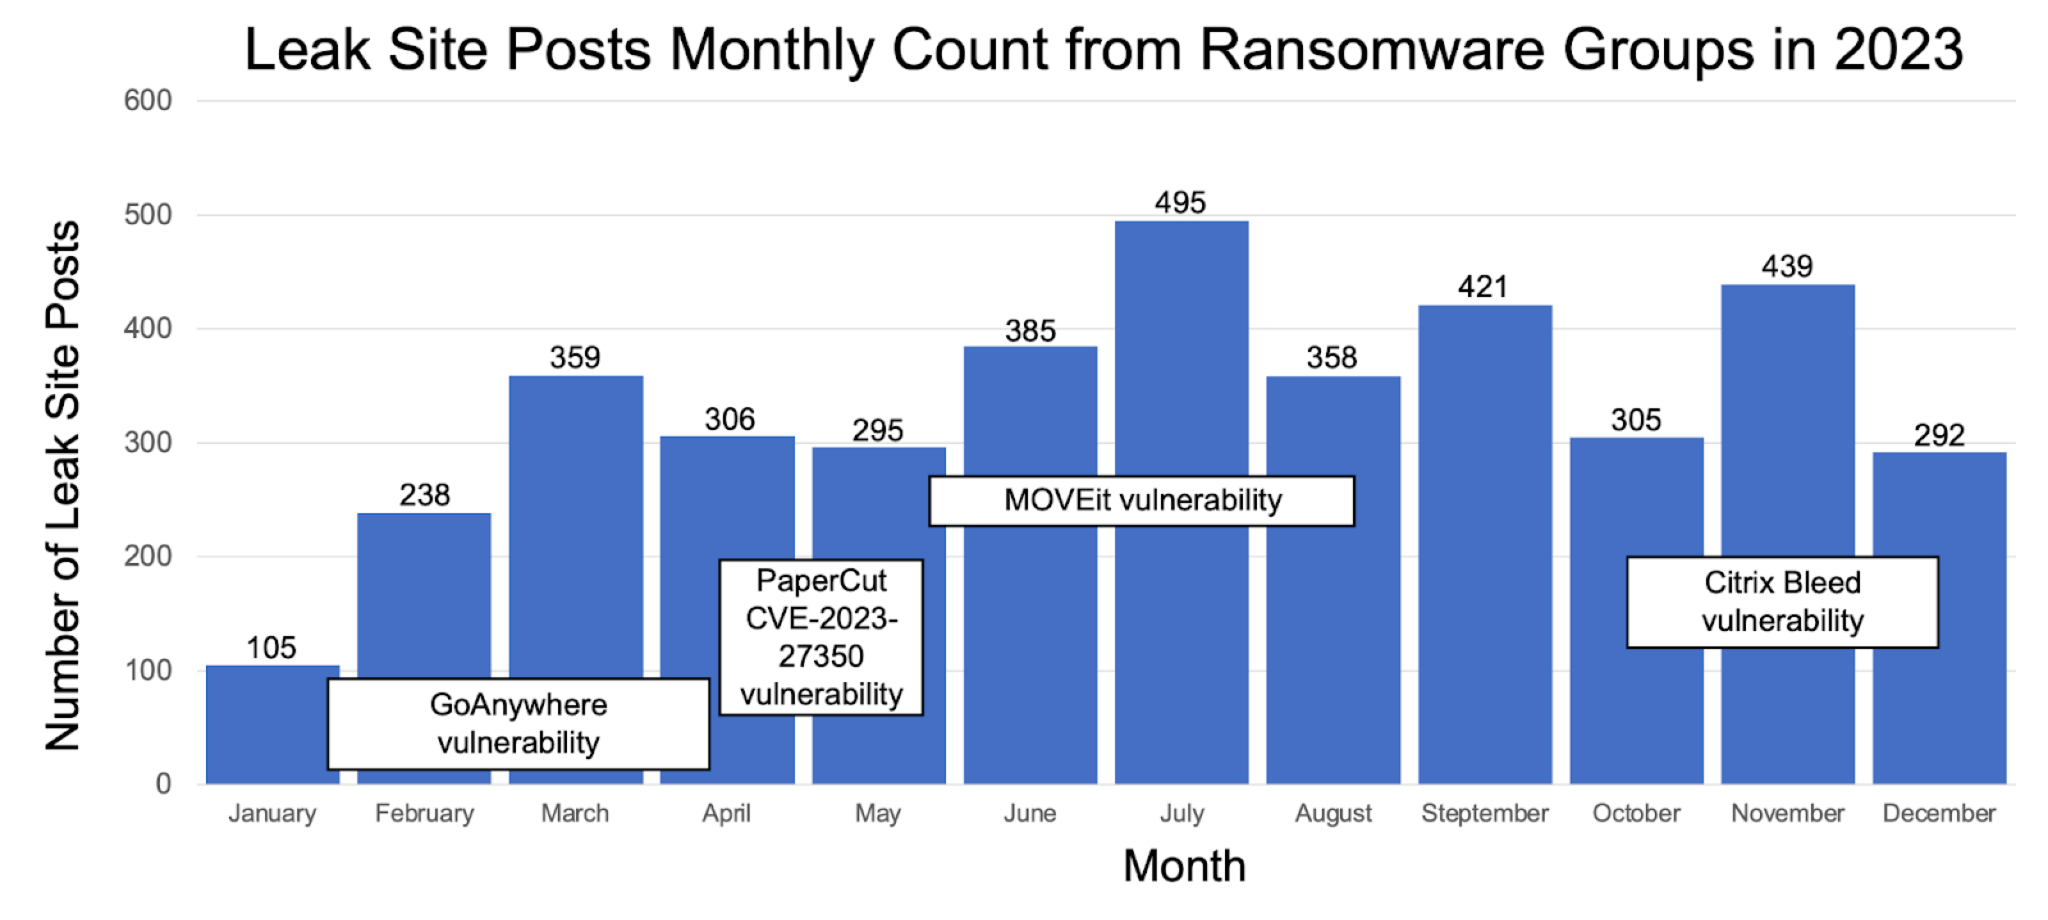  Manufacturing the worst hit by ransomware in India: Palo Alto Networks’ Unit 42 research